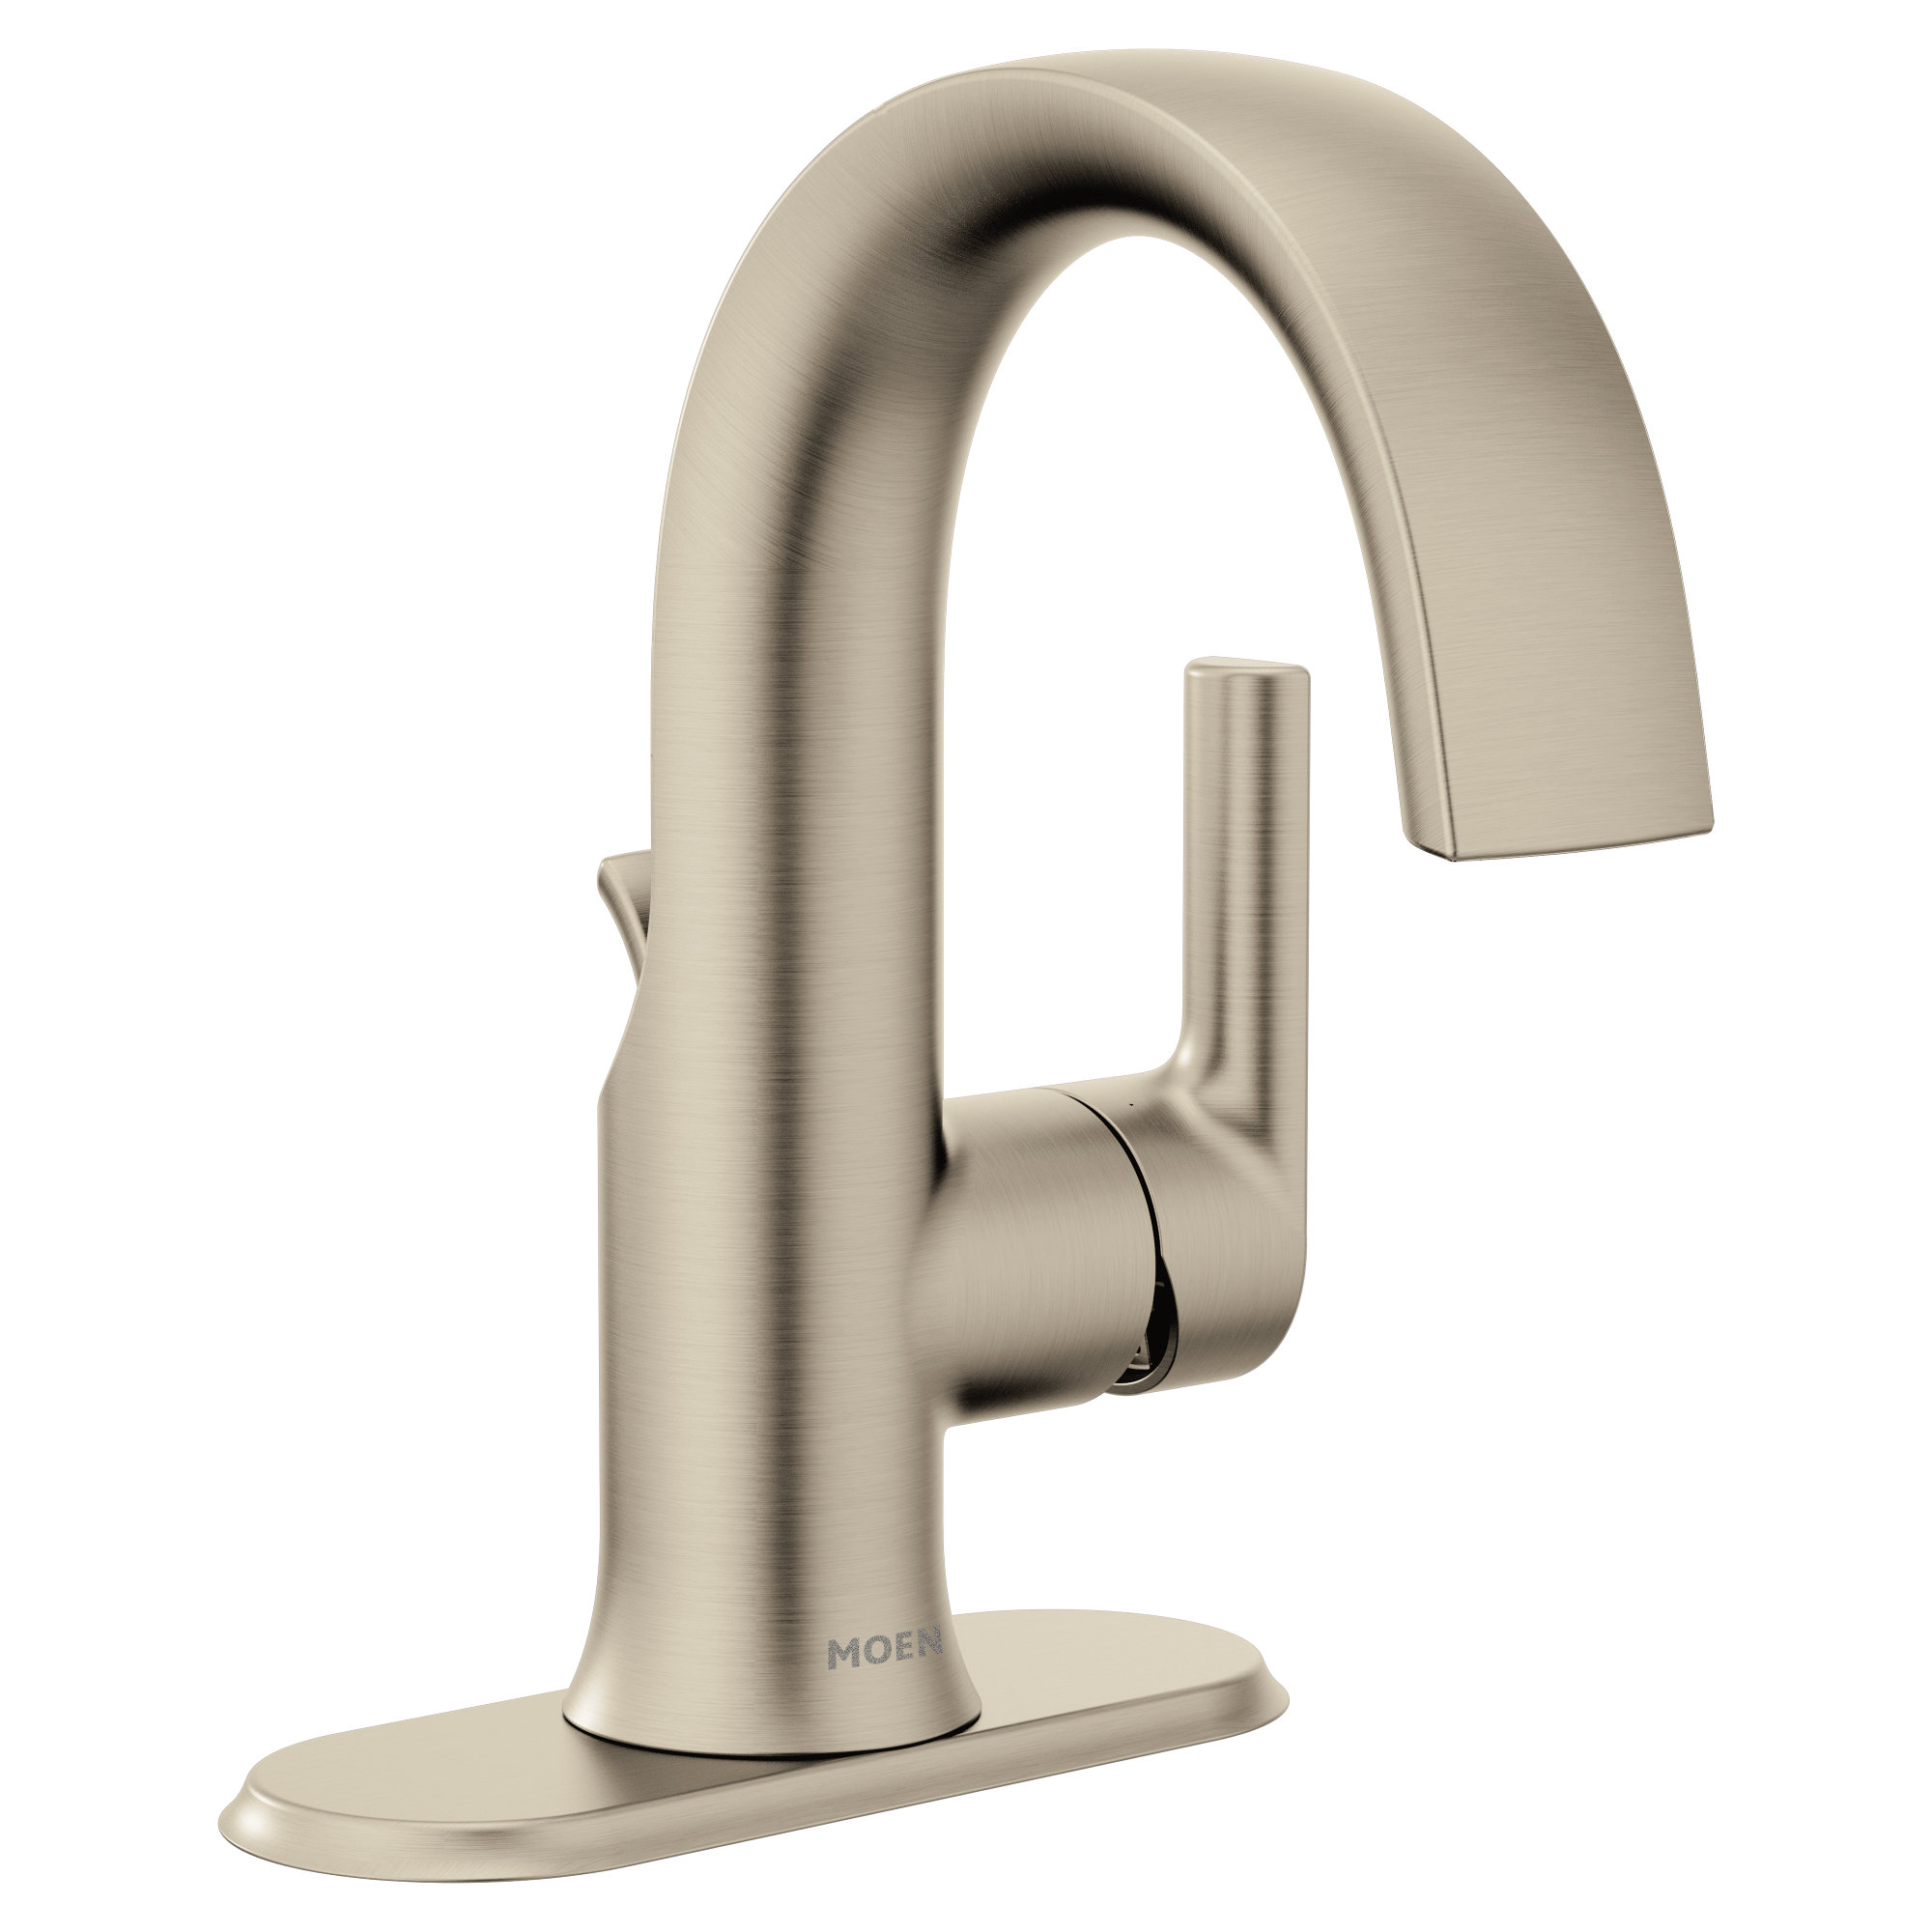 Moen Doux Single Hole Bathroom Faucet With Drain Assembly